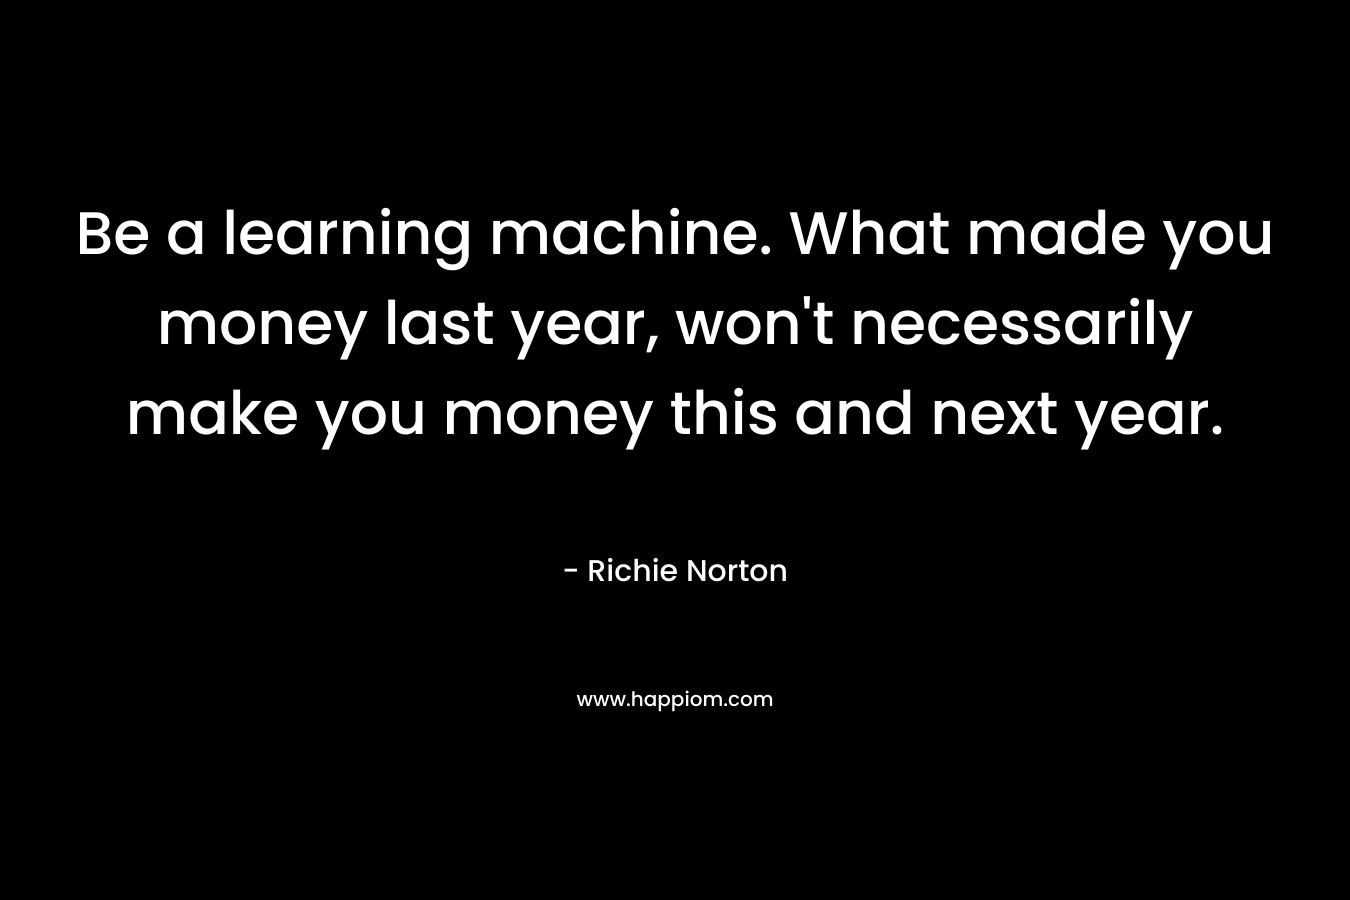 Be a learning machine. What made you money last year, won't necessarily make you money this and next year.